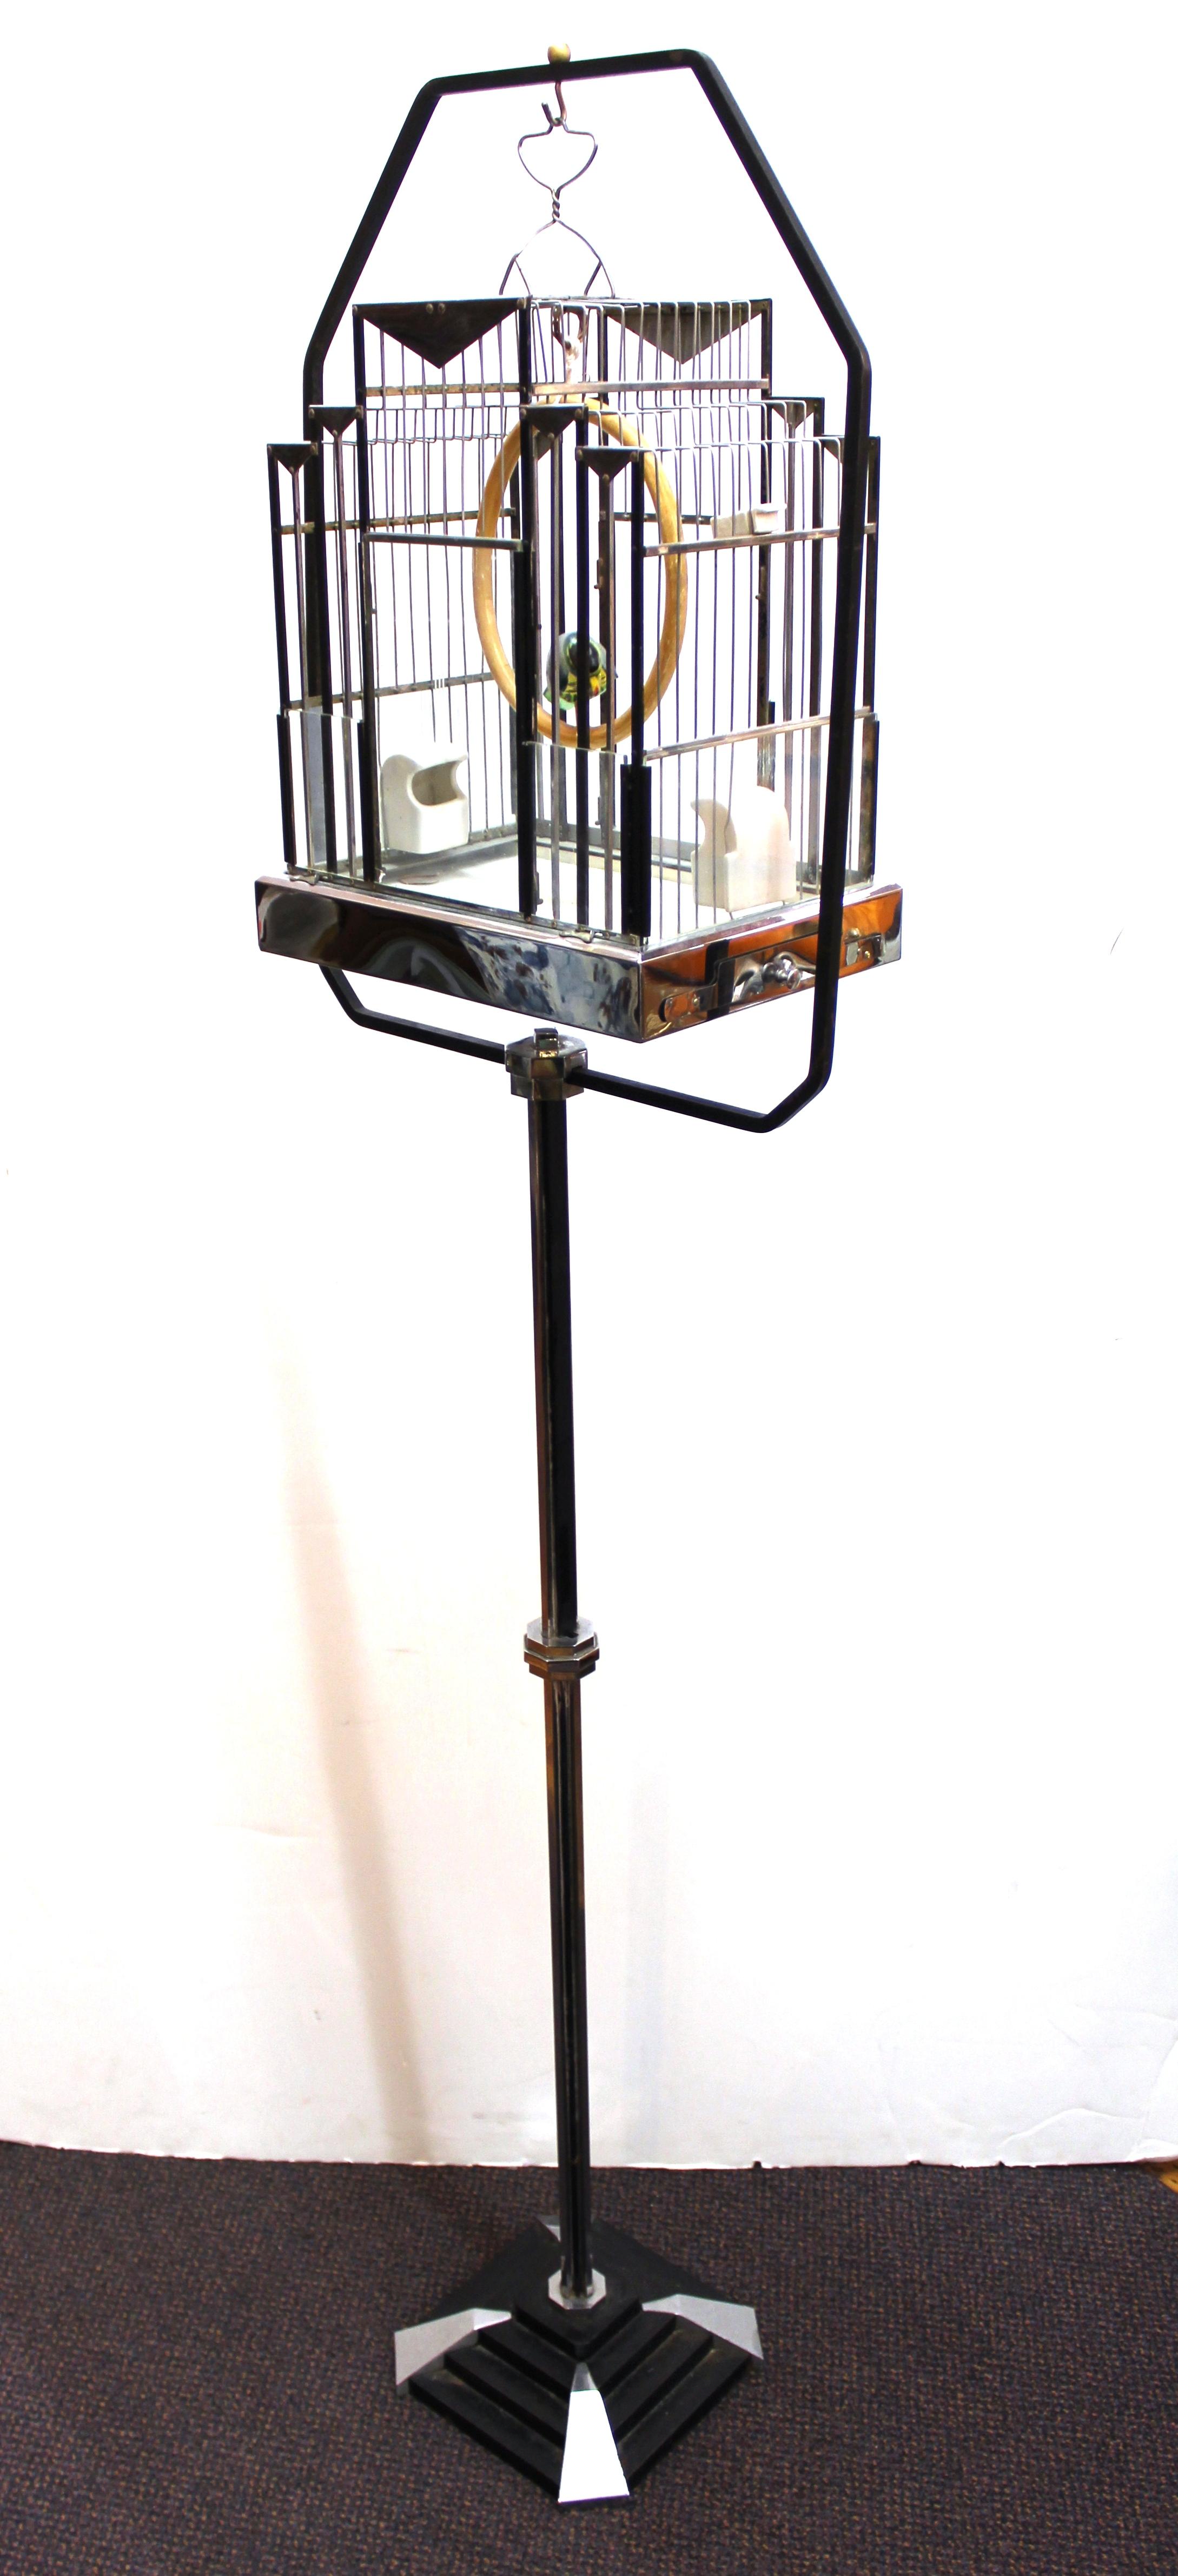 Art Deco period birdcage on stand, made in partly enameled black metal with accents and elements in chrome and etched glass pieces. The cage itself is shaped in the style of Hendryx birdcages and comes with a wooden bird sculpture. Two removable